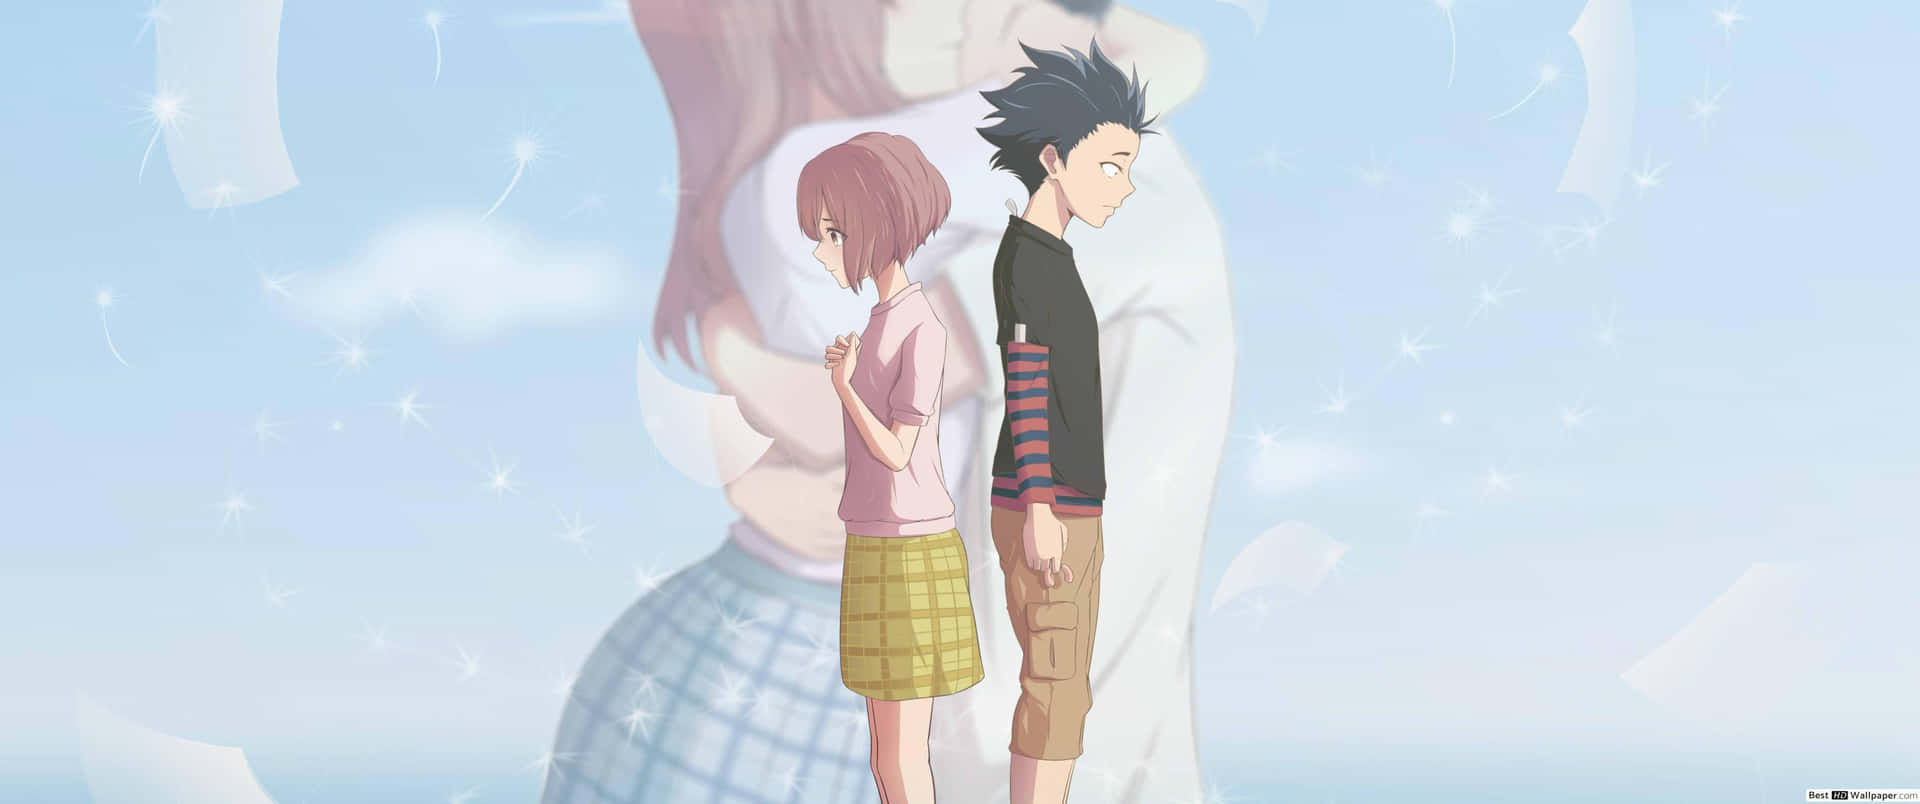 A Silent Voice brings a captivating story of redemption